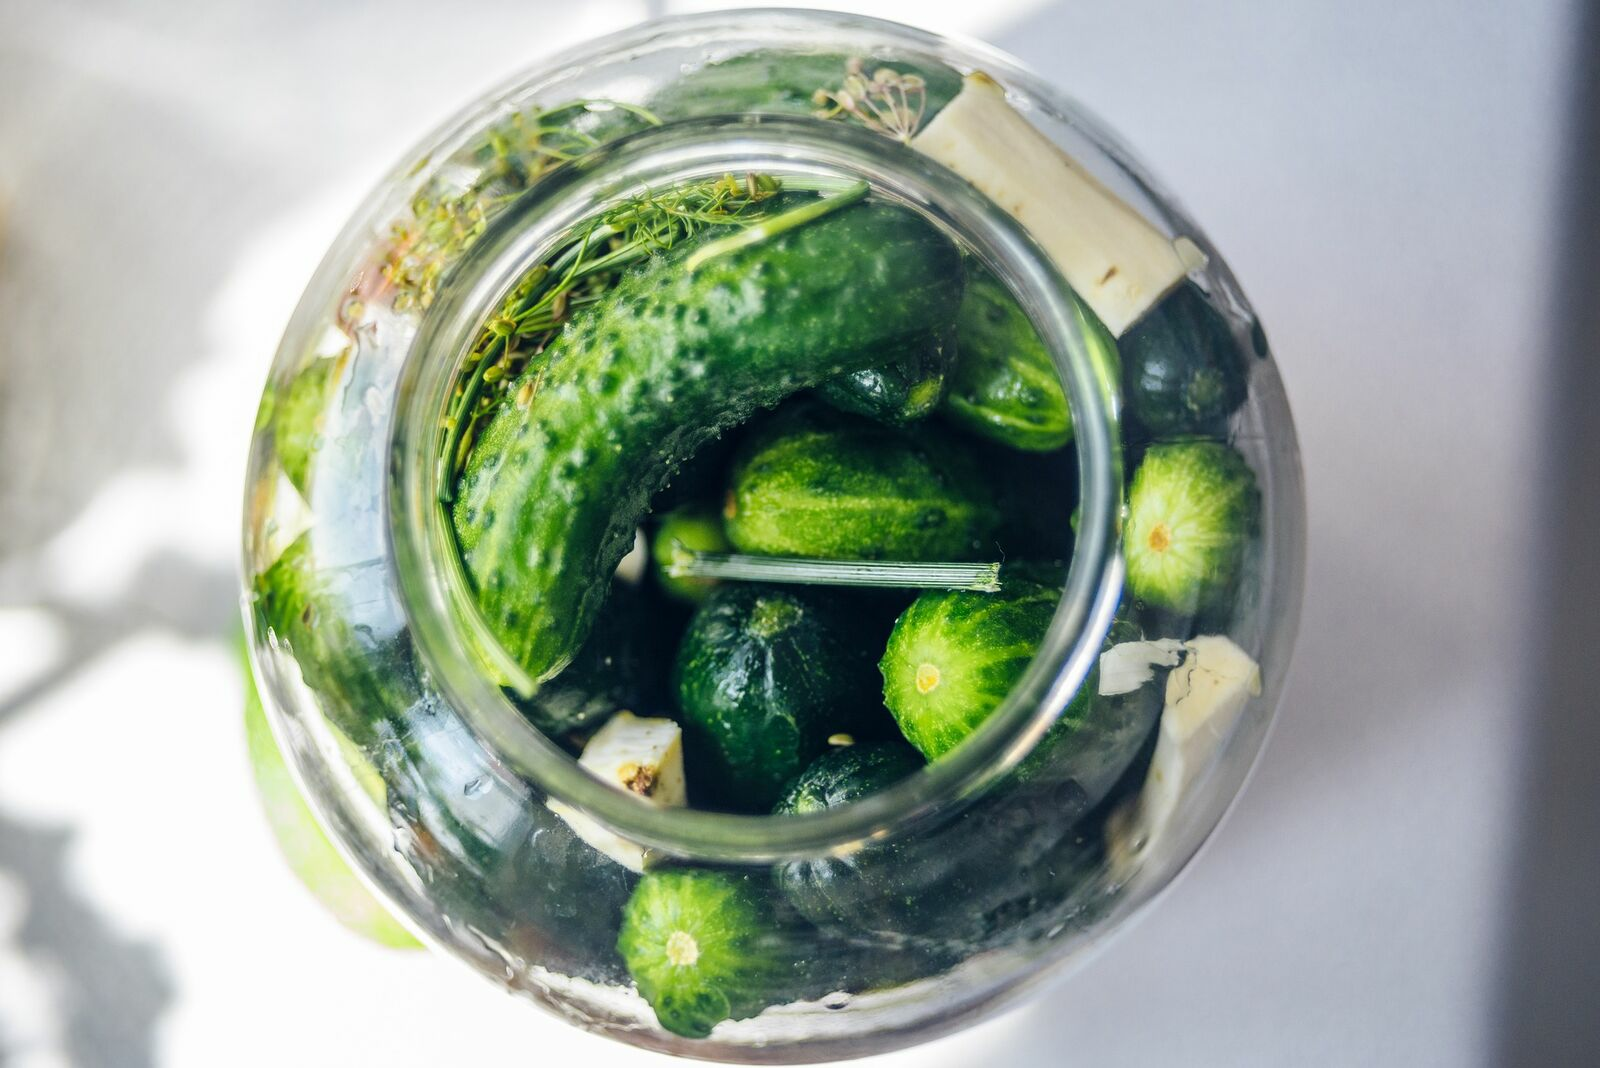 Pickling cucumbers: make your own pickles